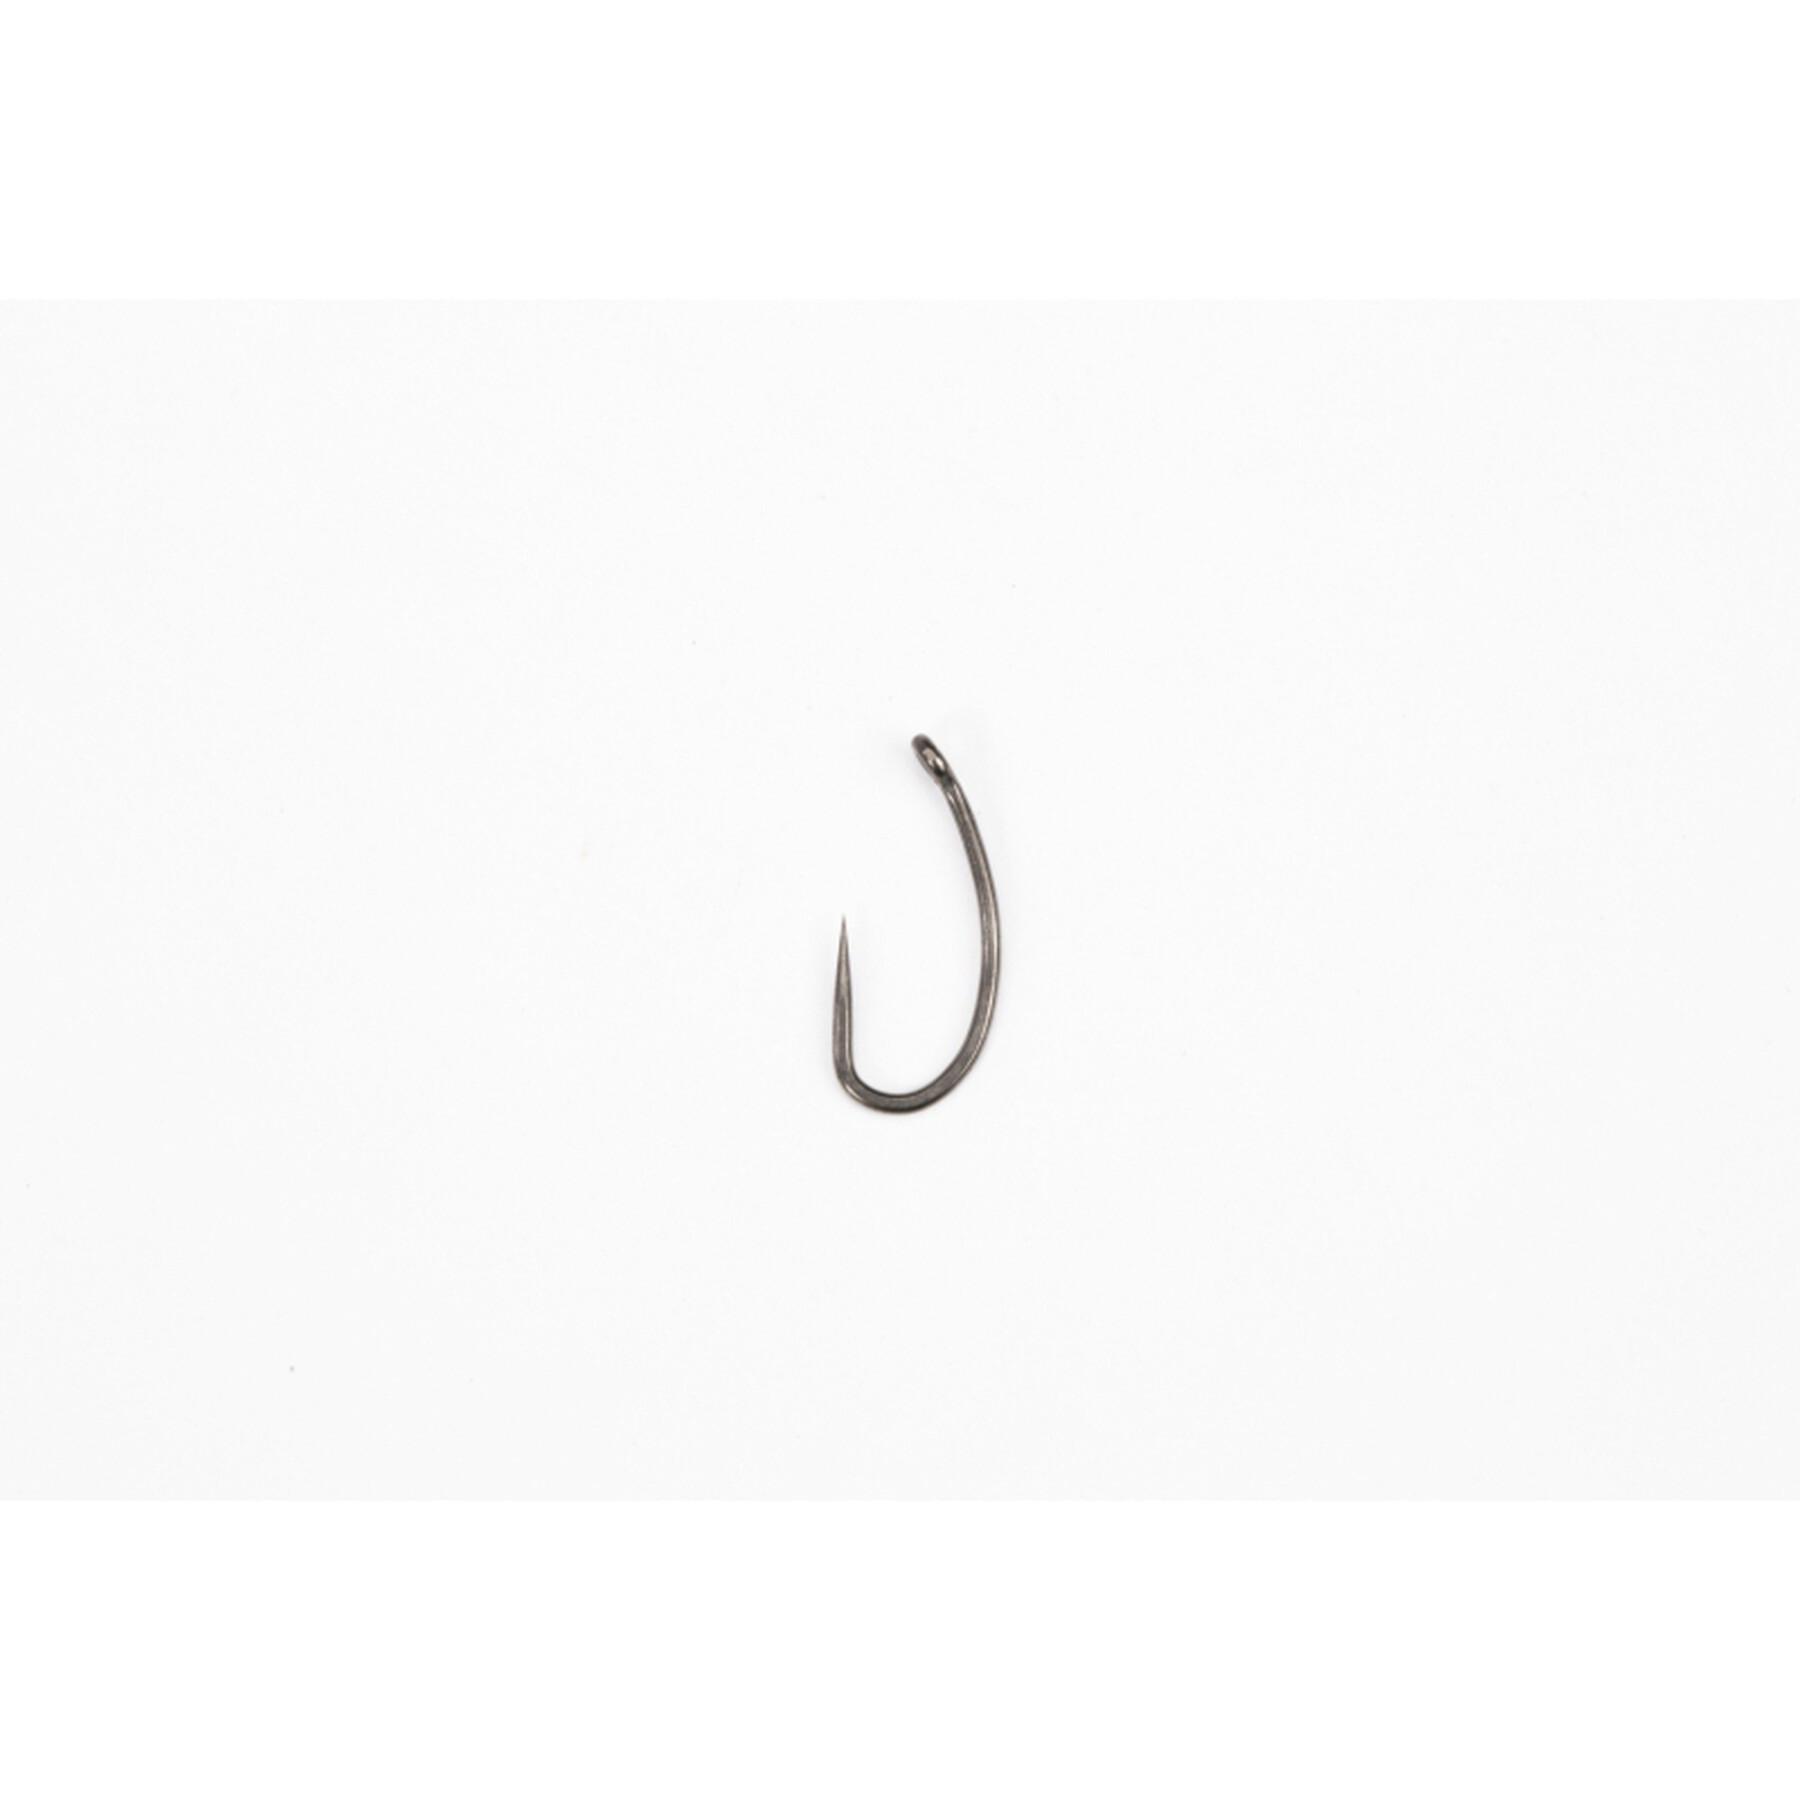 Hook Pinpoint Fang X size 10 Micro Barbed